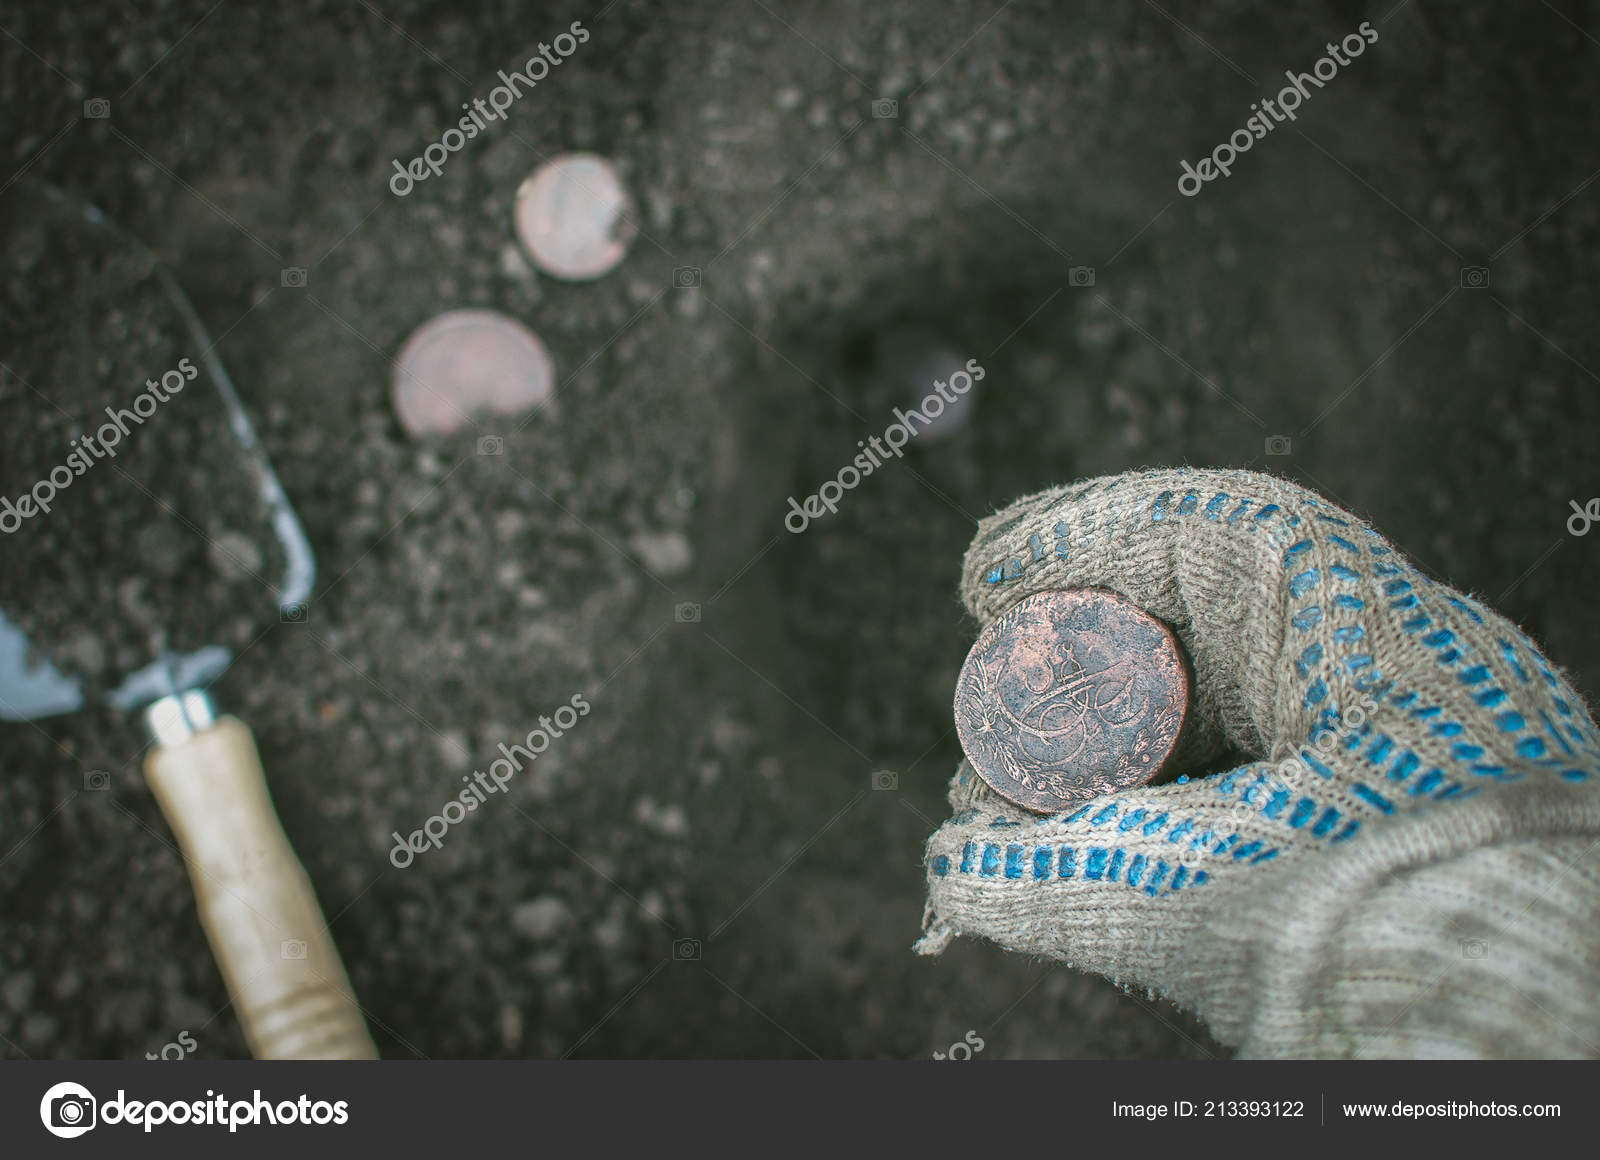 Old Coins Through A Magnifying Glasstreasure Hunting Concept In Search Of A  Lost Treasure Russian Empire Stock Photo - Download Image Now - iStock